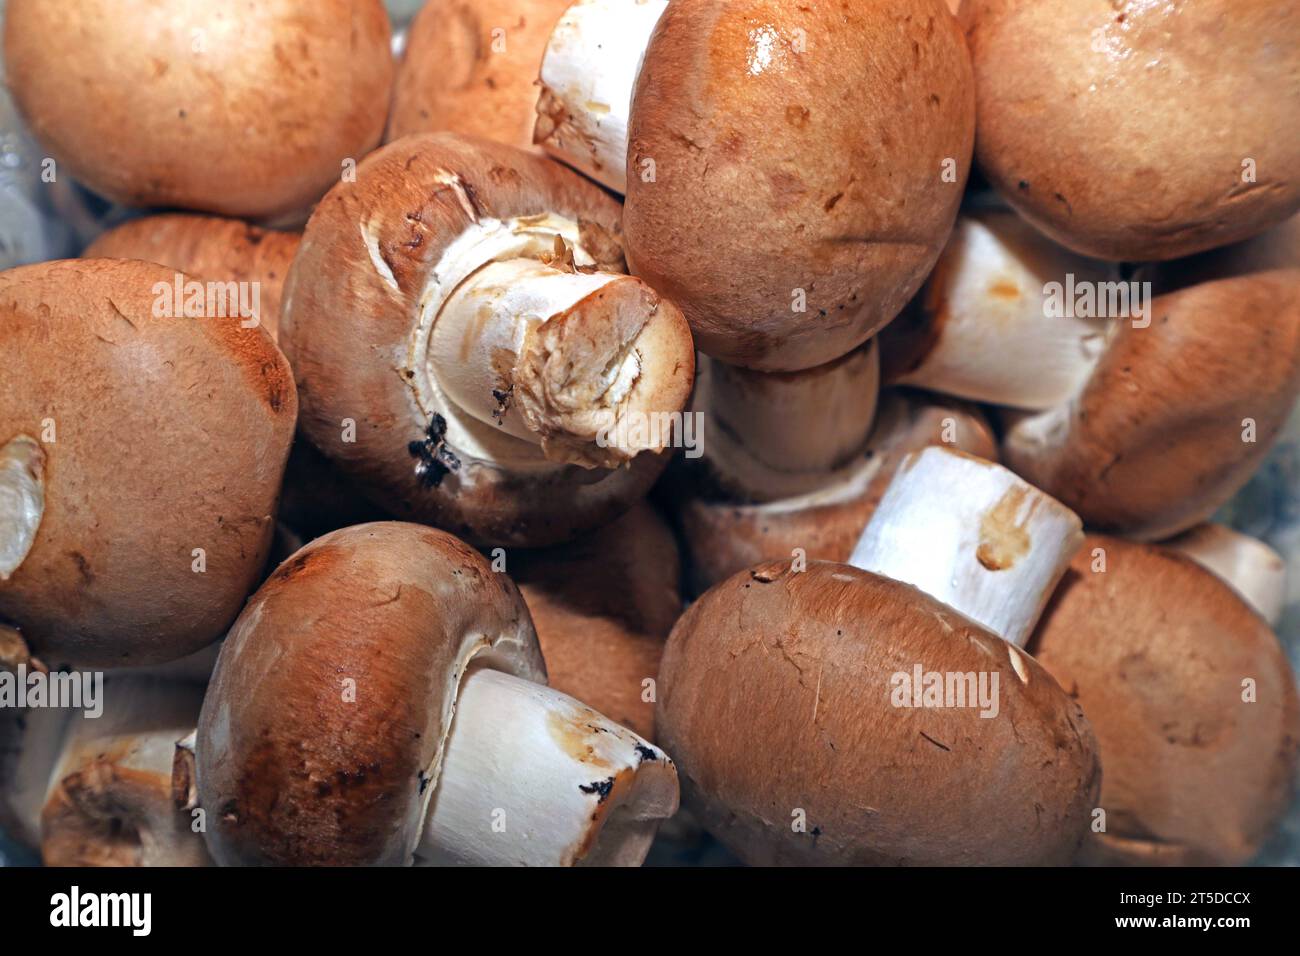 Pilze als Mahlzeit Braune Kulturchampignons zur Verwendung in der Küche *** Mushrooms as a meal Brown cultivated mushrooms for use in the kitchen Credit: Imago/Alamy Live News Stock Photo